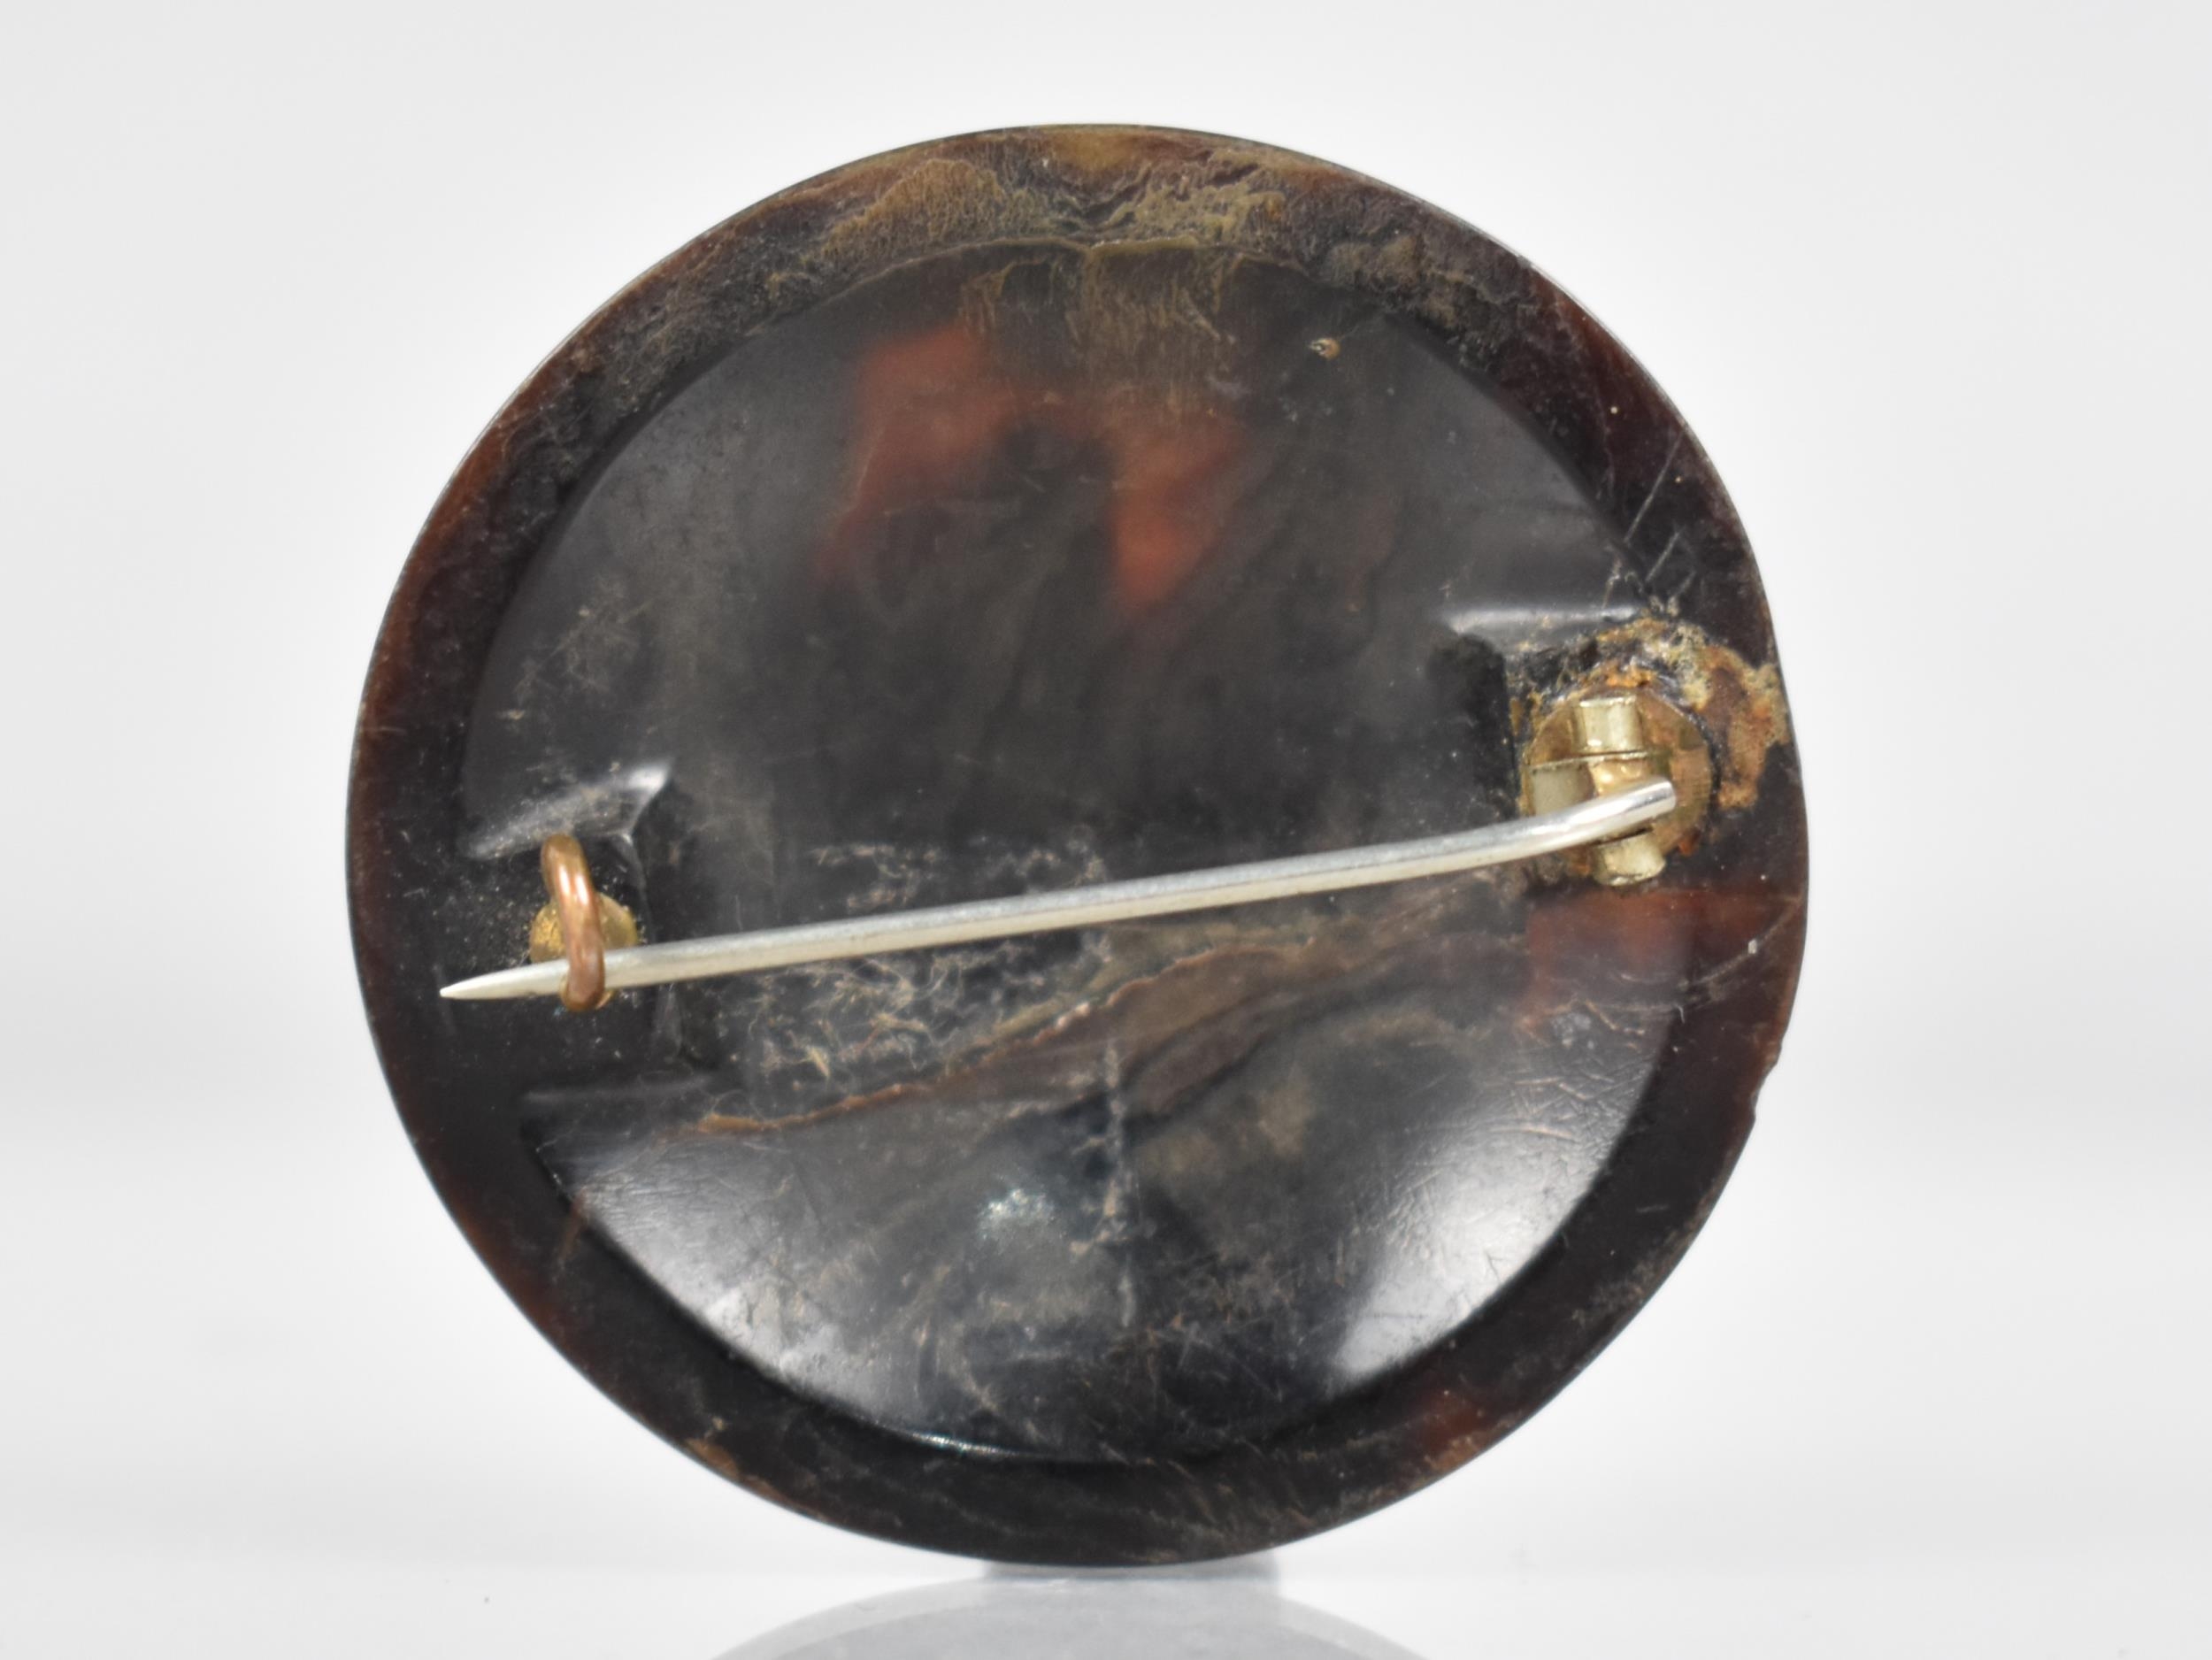 A Victorian Circular Tortoiseshell Brooch with Pique Gilt and White Metal Embellishments, Floral - Image 2 of 2